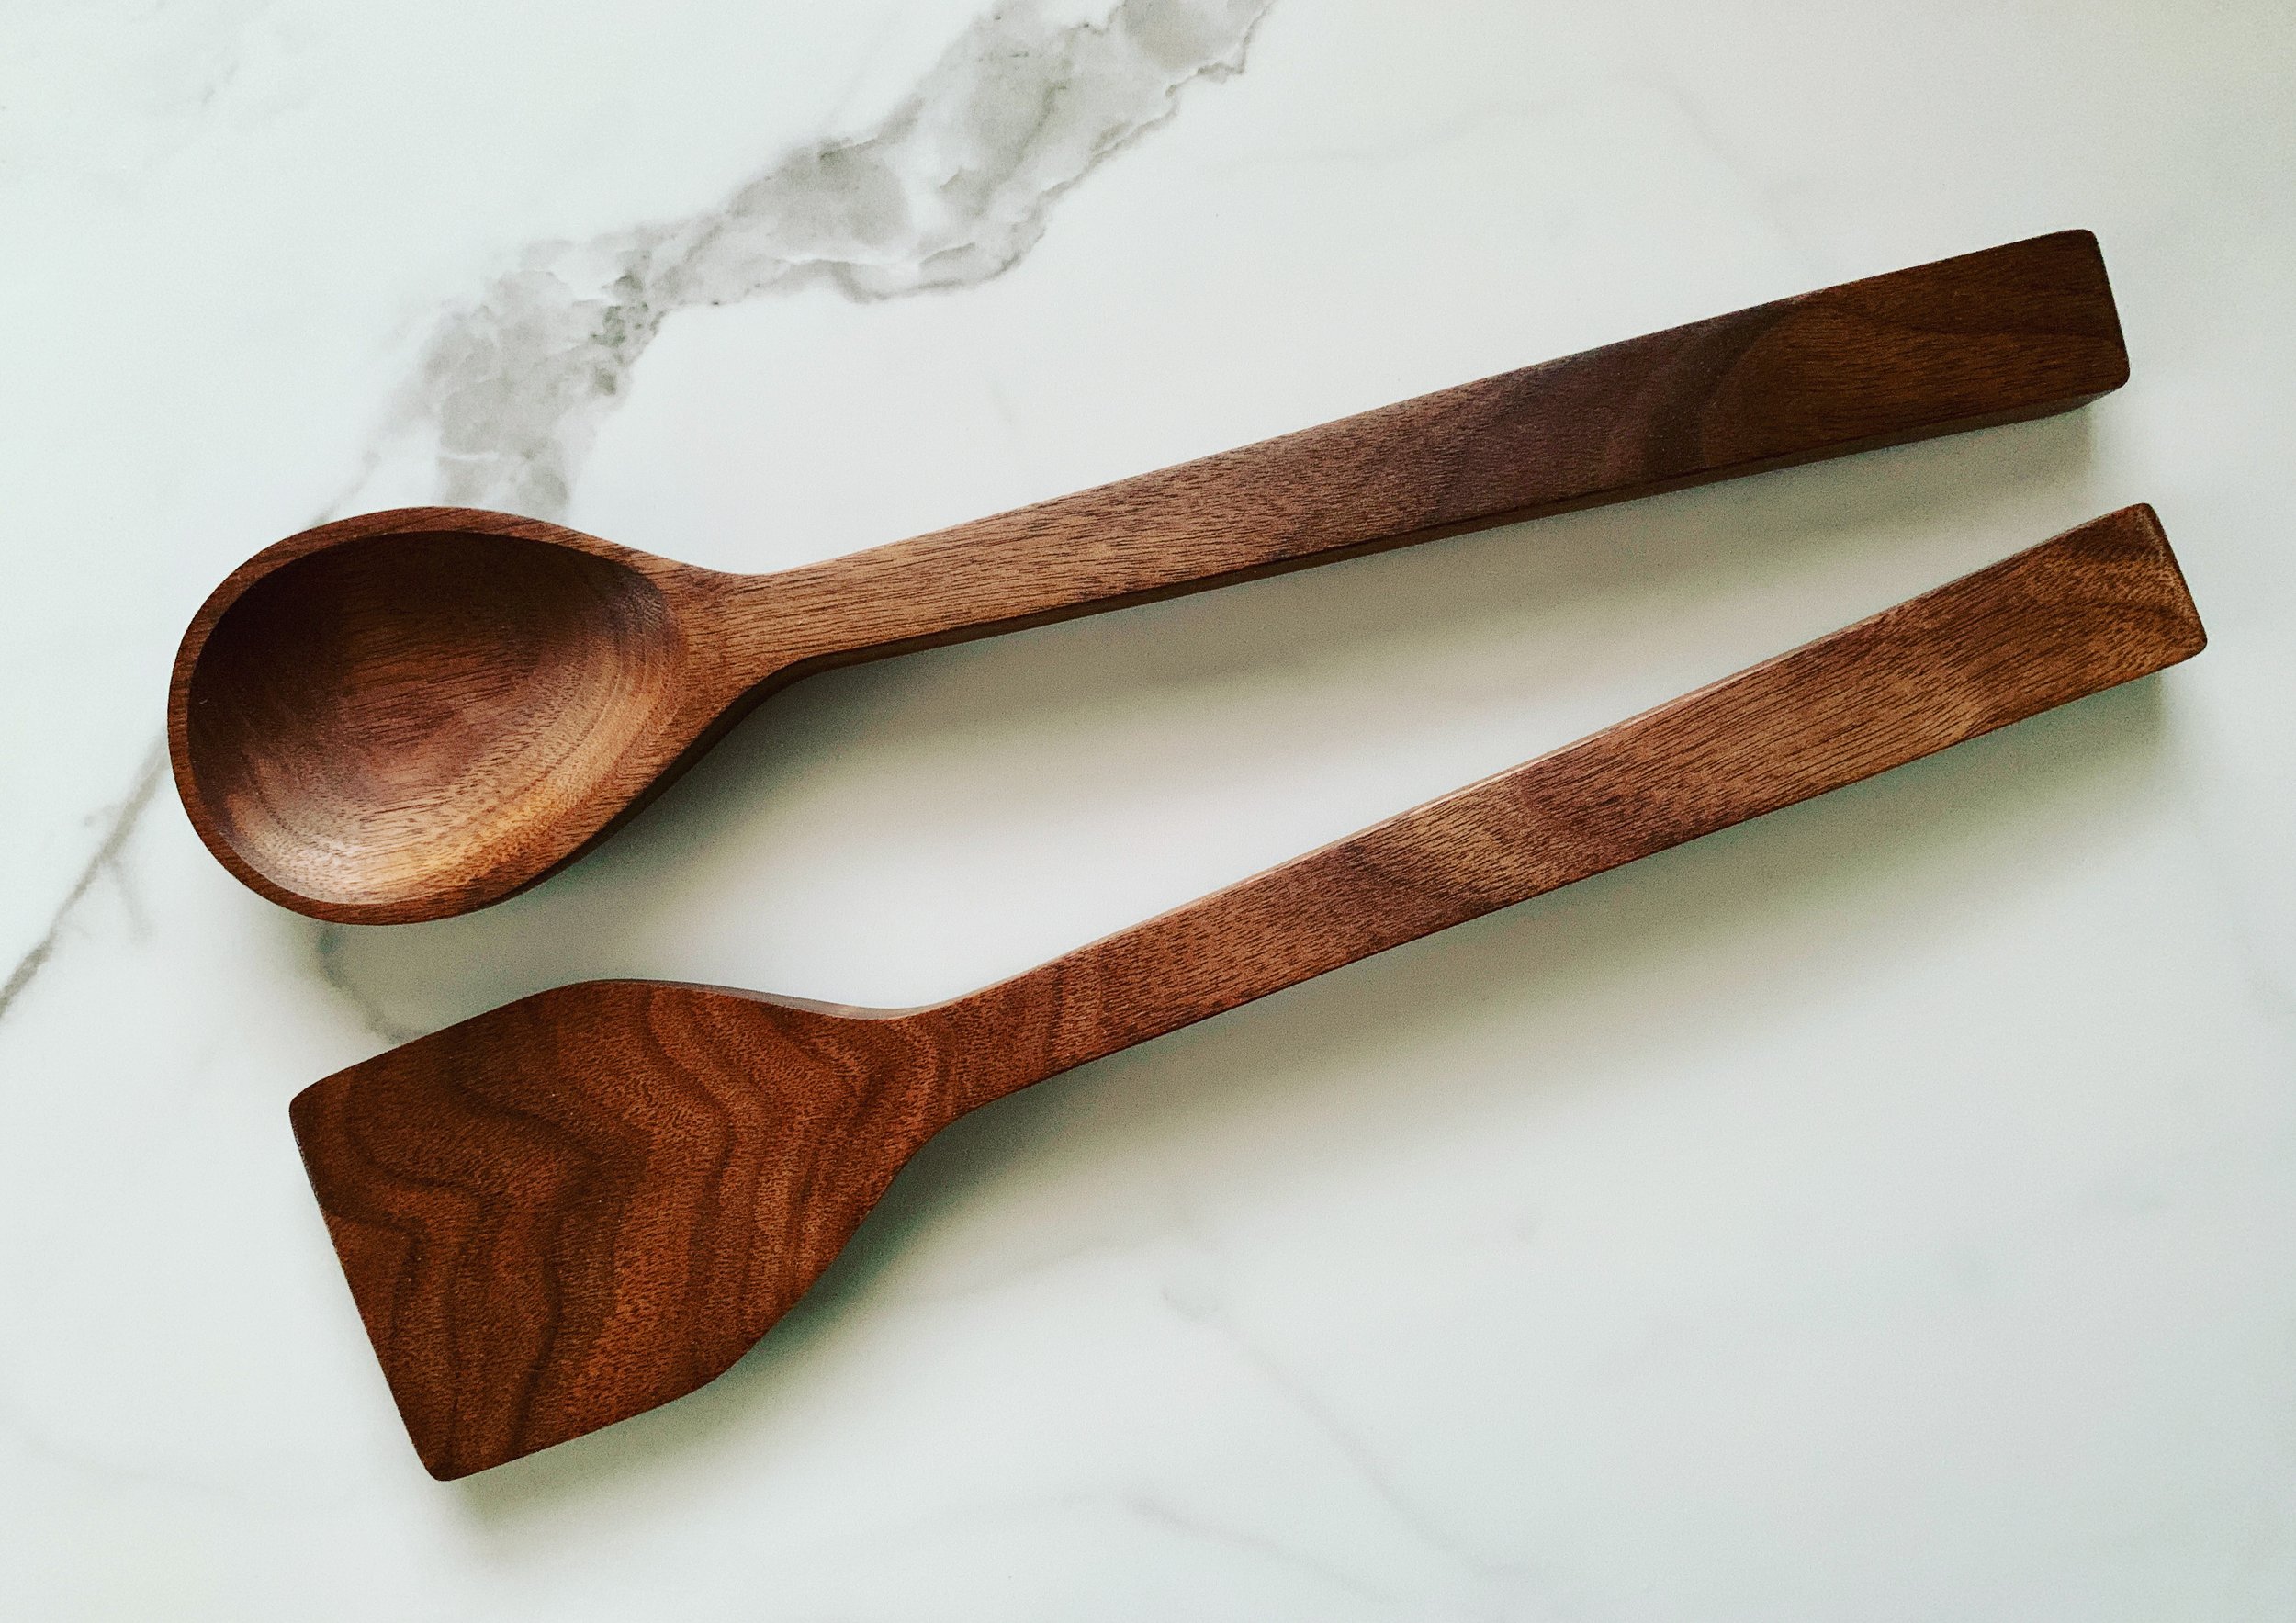 Your Traditional Spoon and Spatula Set